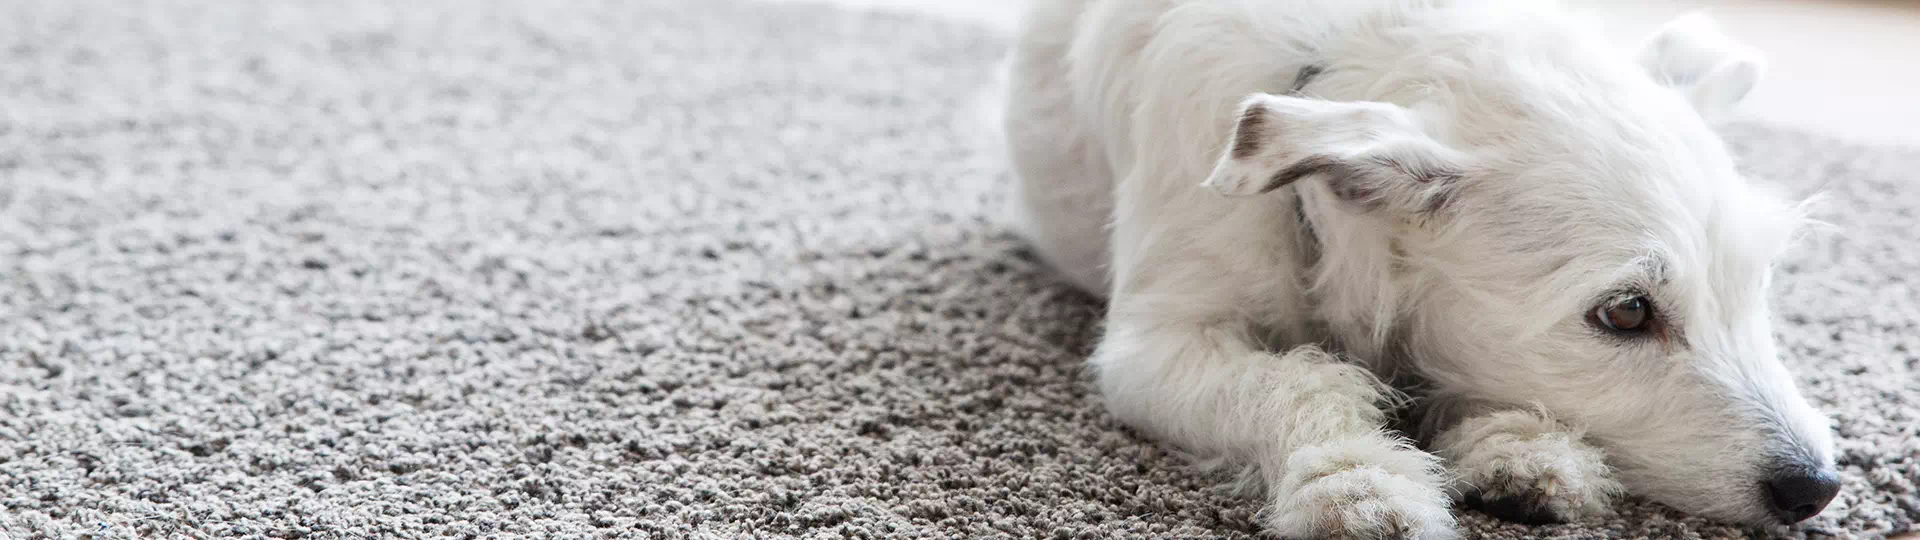 How to Clean Dog Vomit from Carpet - Simple Green